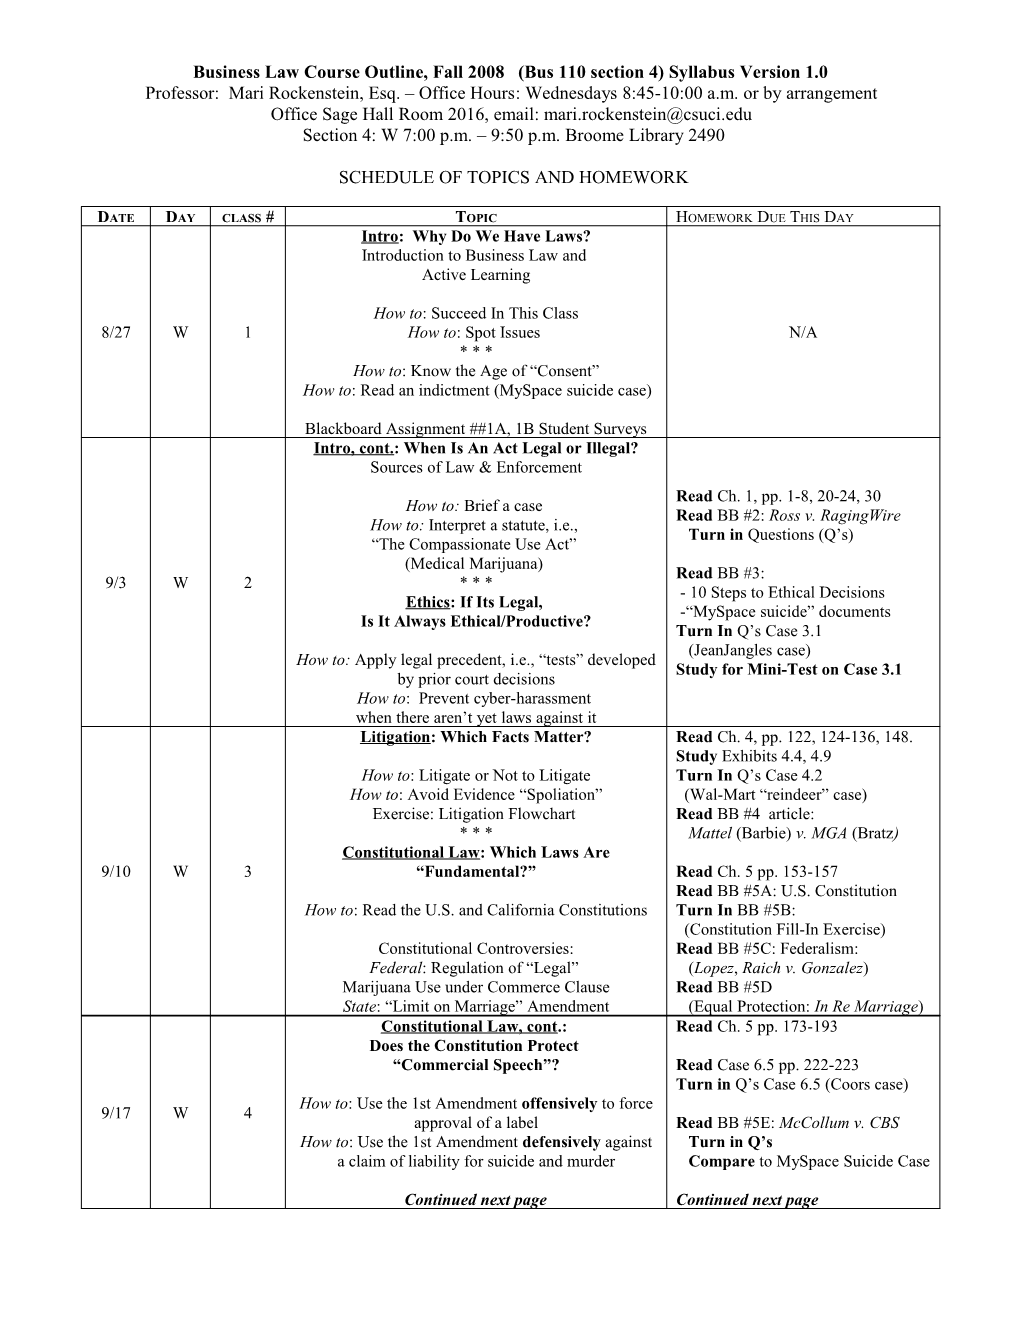 Business Law Course Outline, Fall 2008 (Bus 110 Section 4) Syllabus Version 1.0